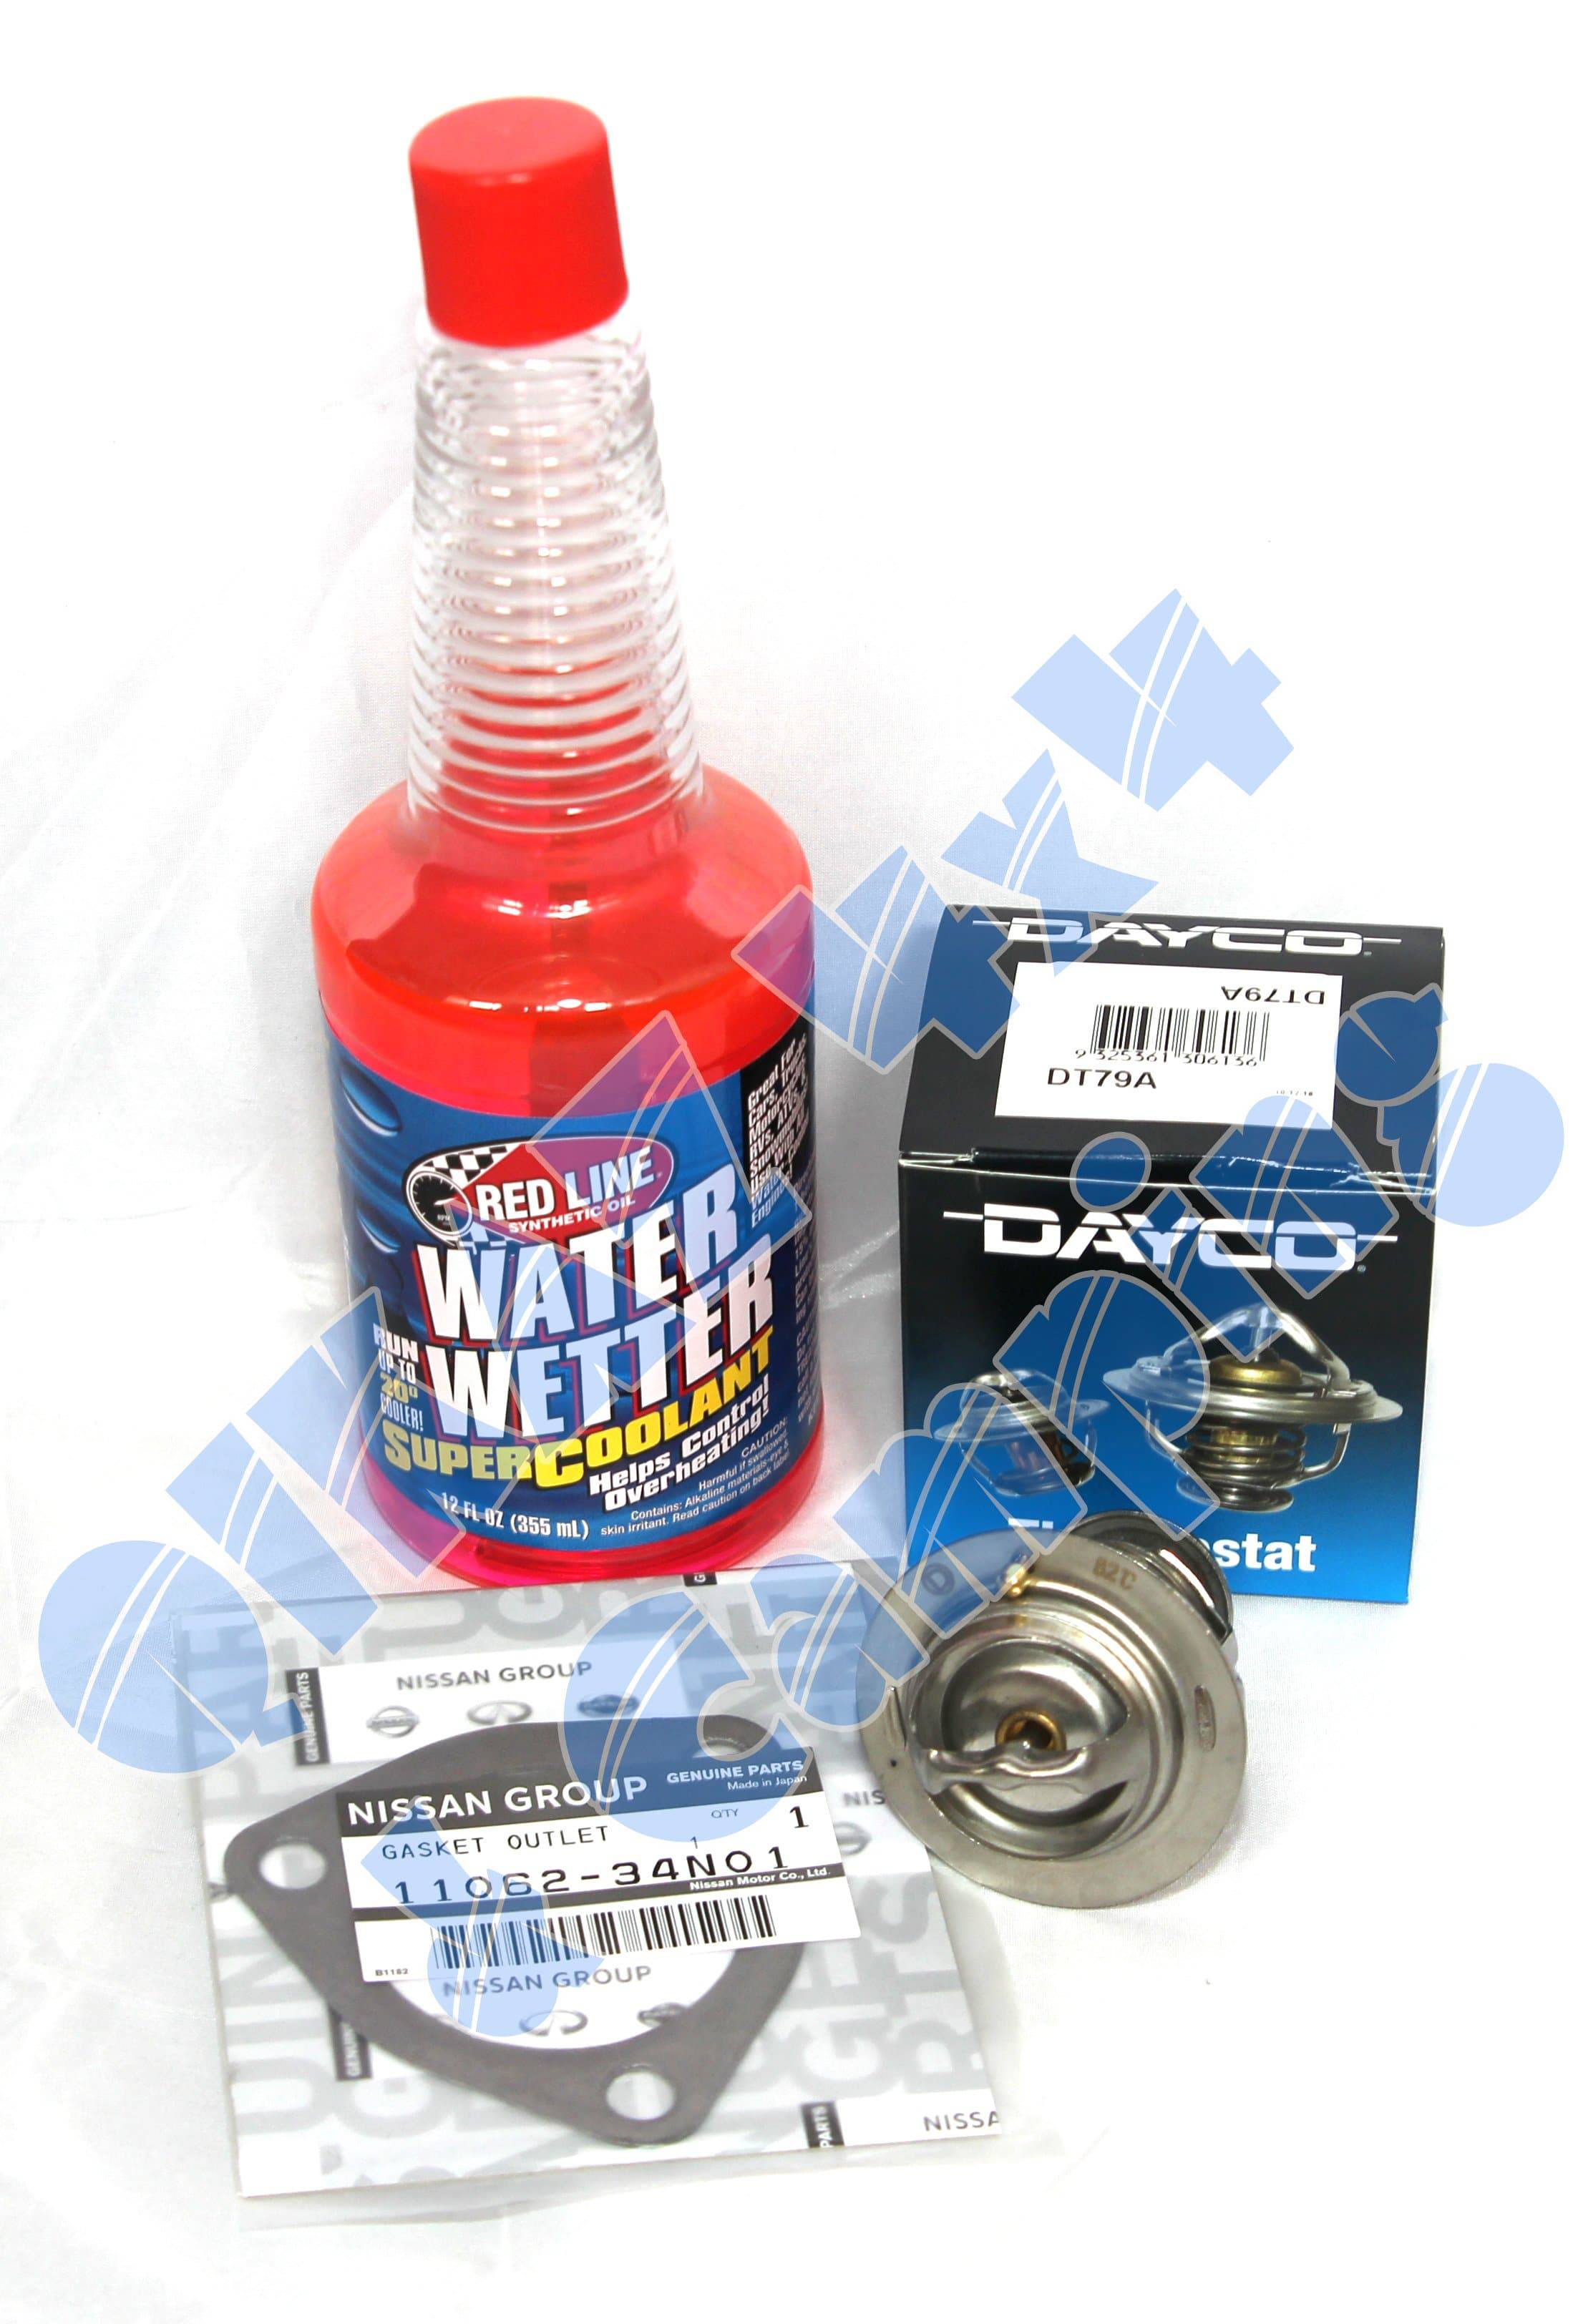 Dayco DT79A Thermostat + Gasket for Nissan Patrol GQ / GU TD42 + WaterWetter | Dayco